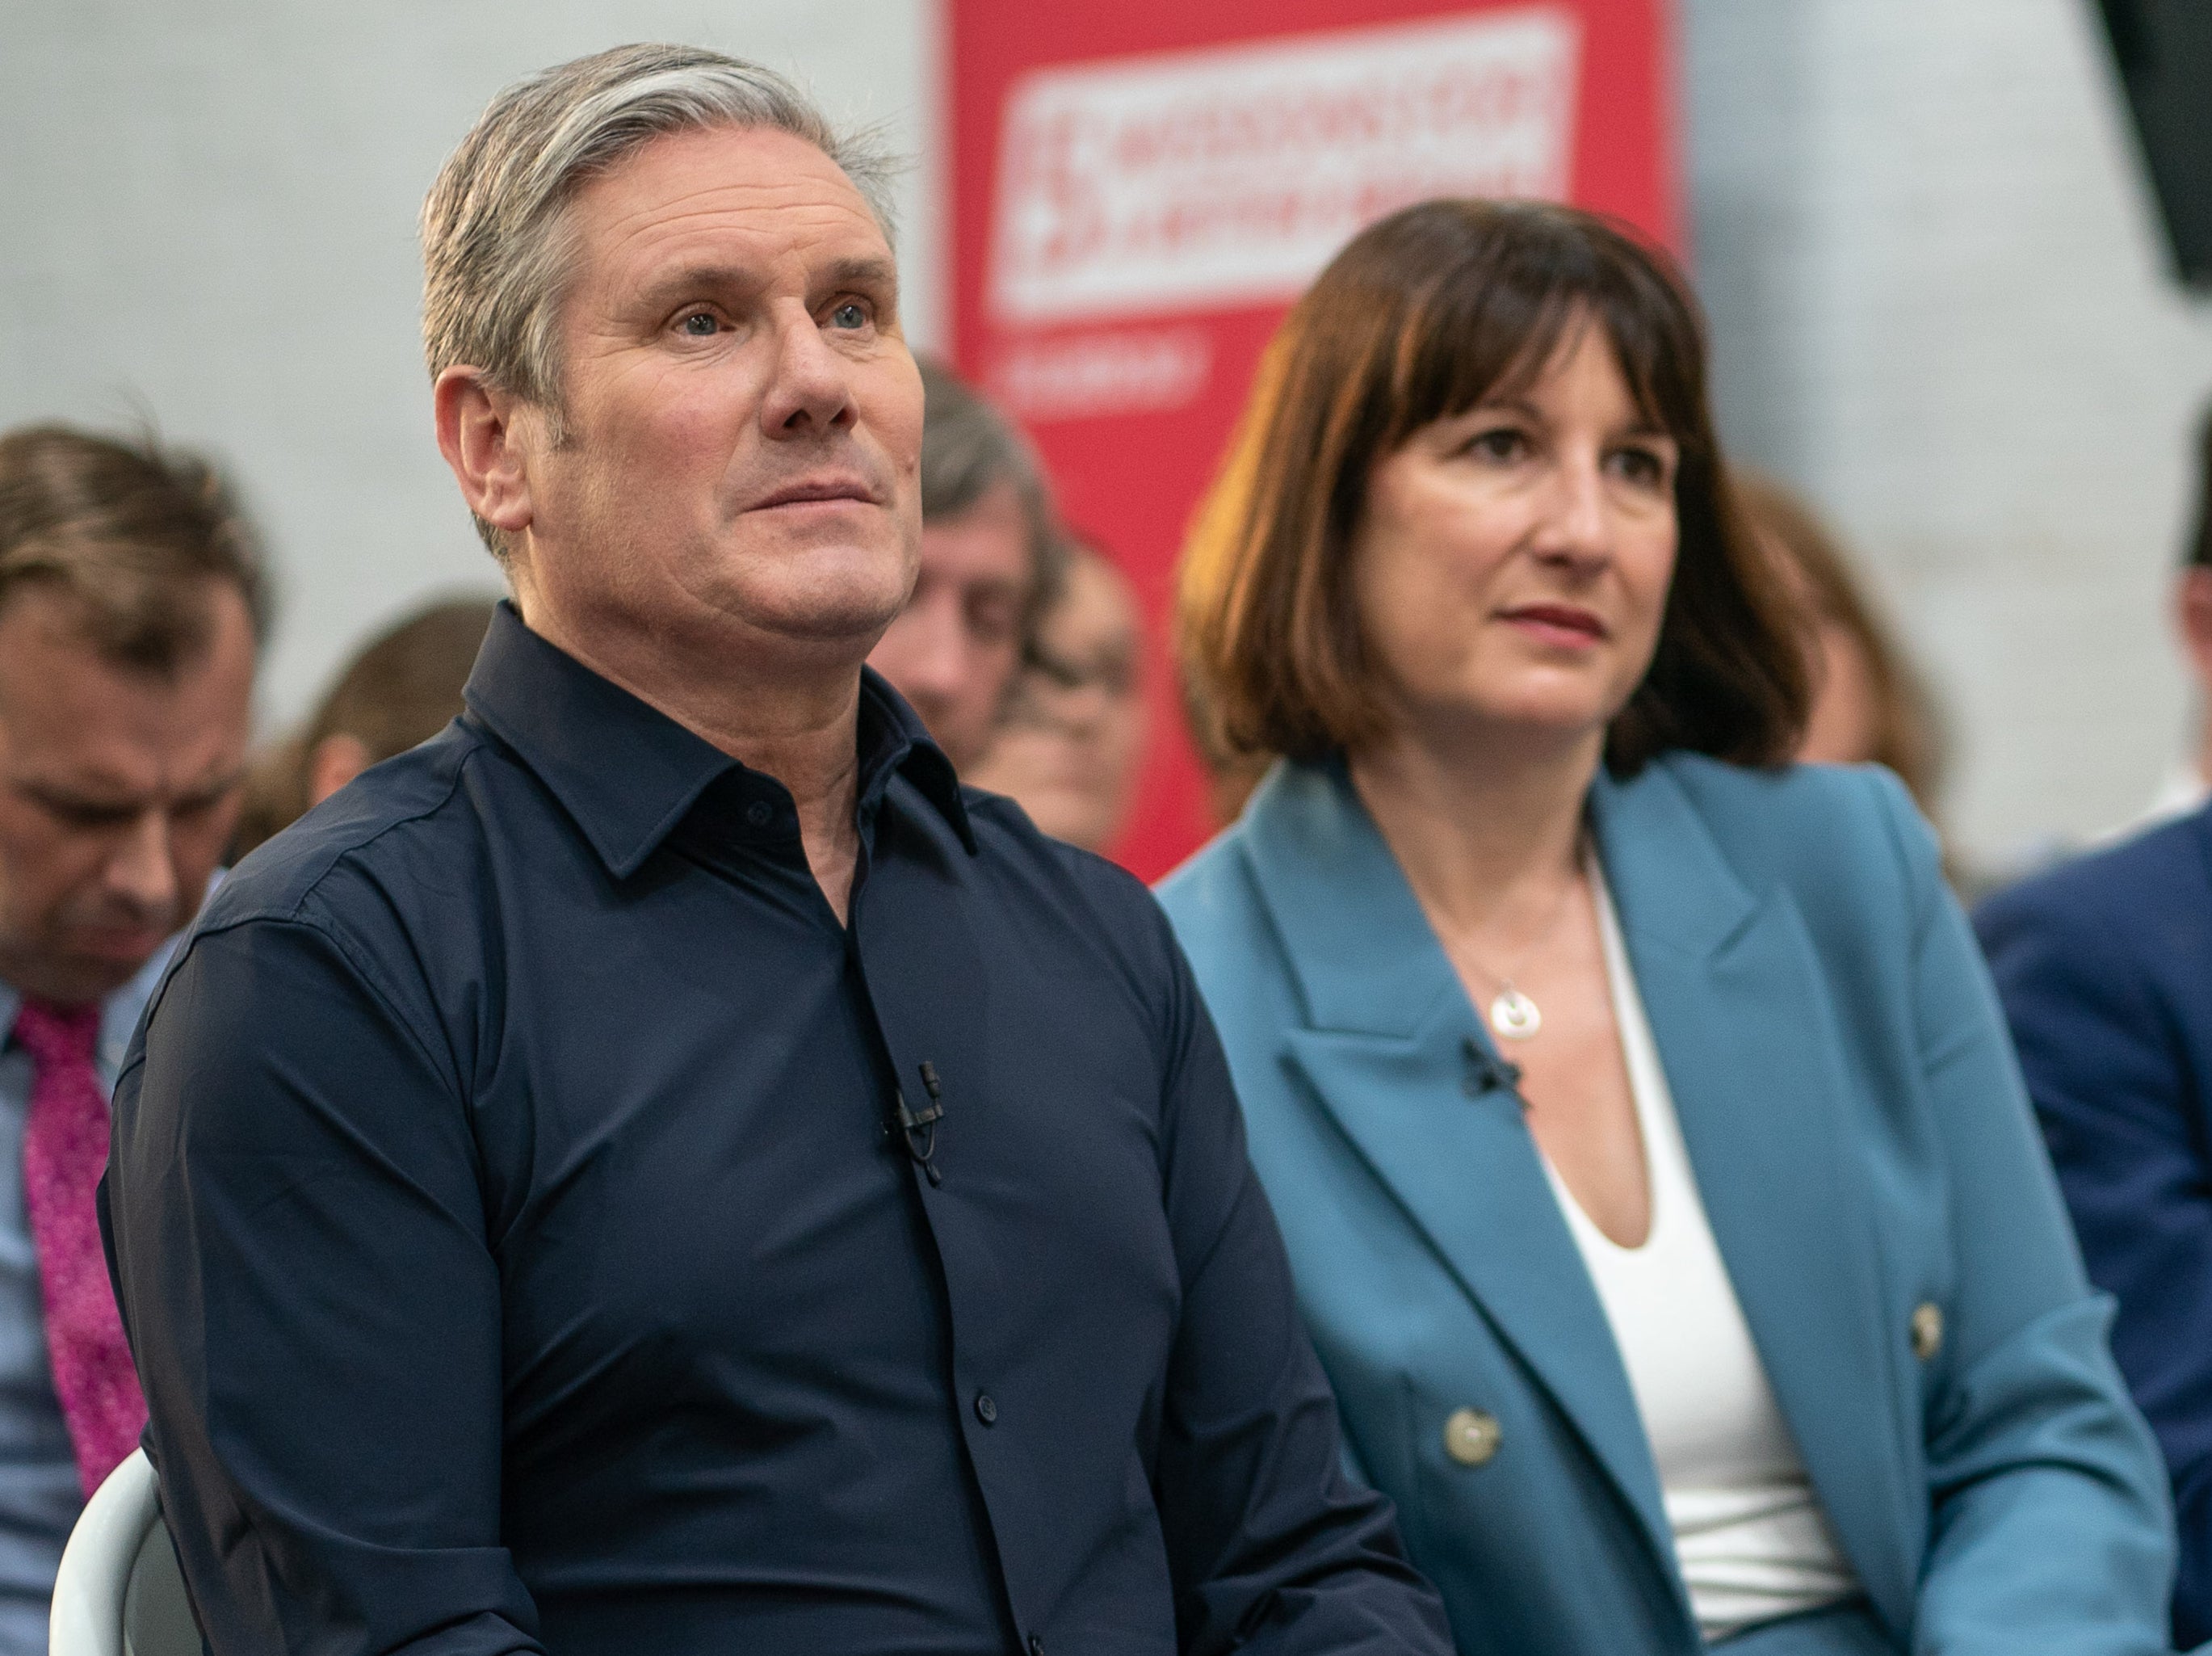 Starmer’s economic policy hasn’t left the Tories with much room to manoeuvre, writes Andrew Grice. But the electorate deserves honesty above all else